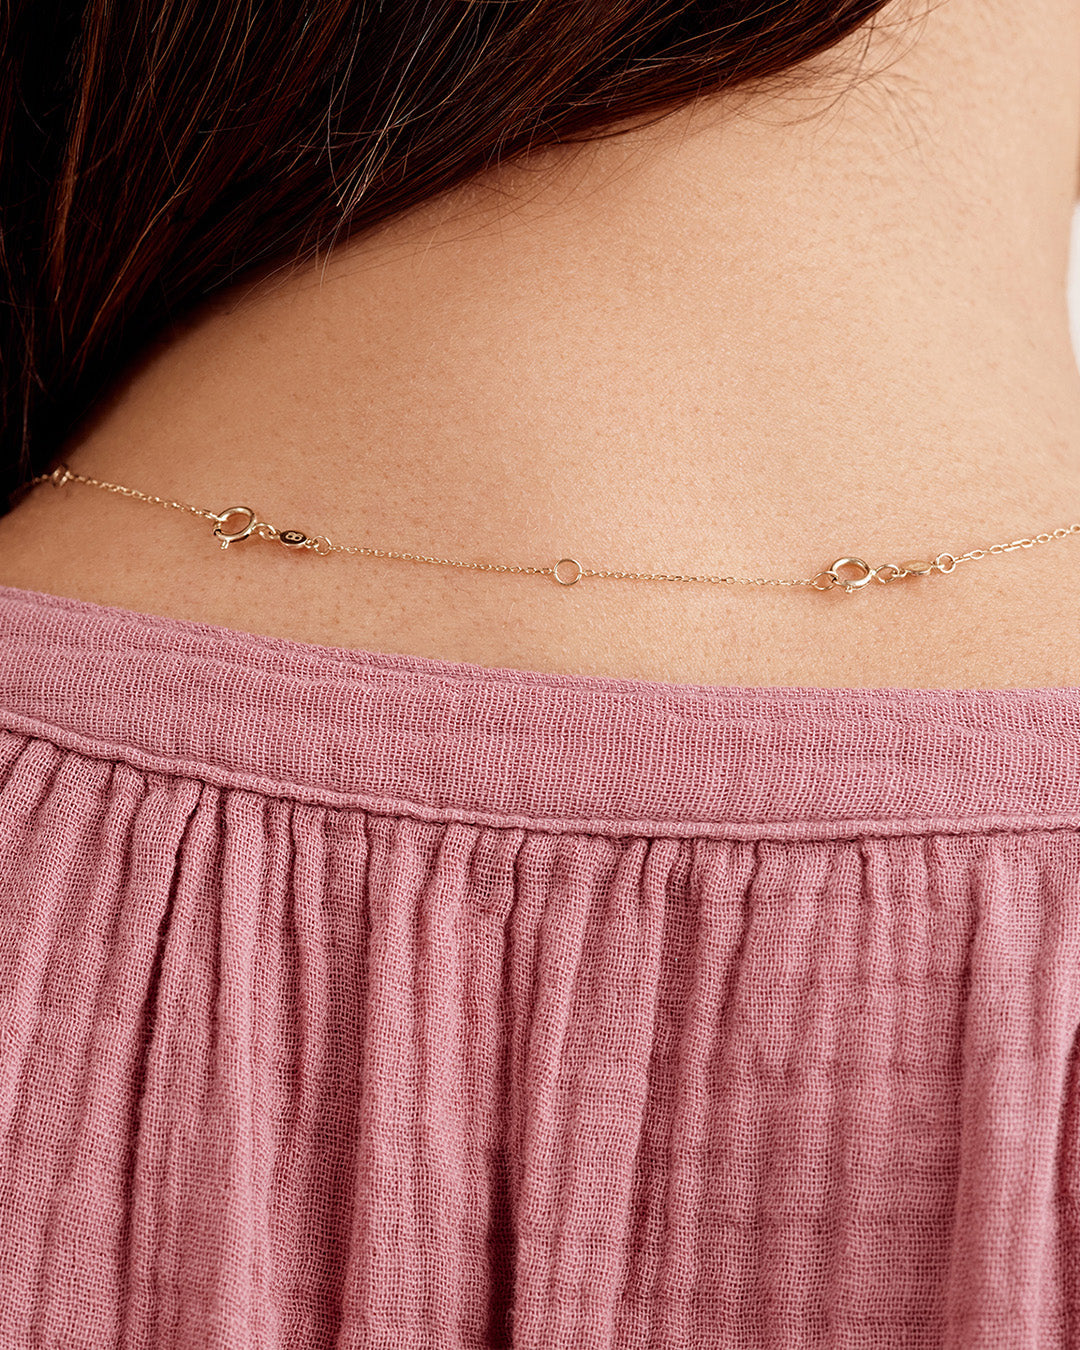 Rose Gold Choker Necklace Extender, Jewelry Extension